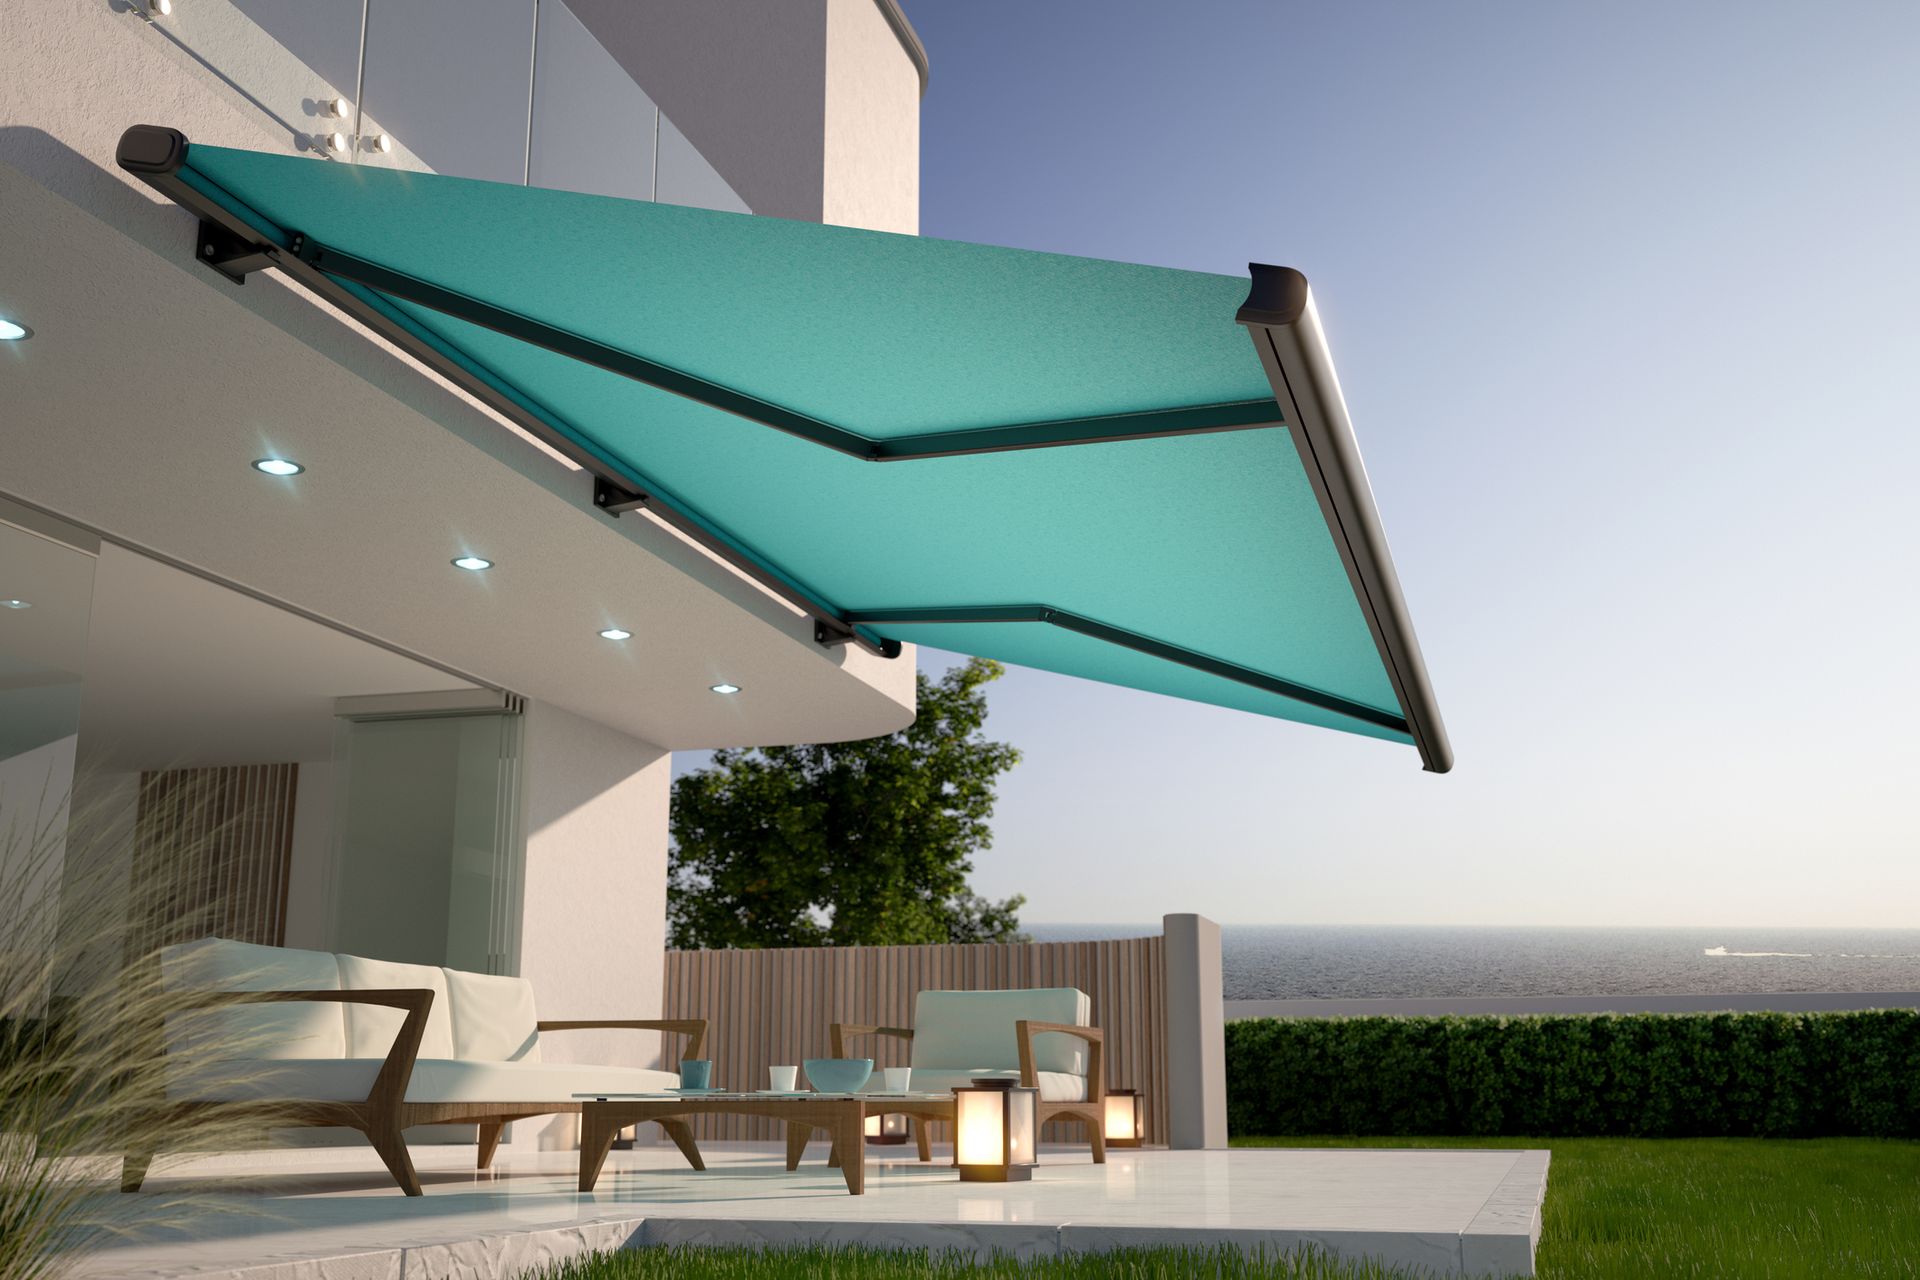 Awning and Luxury House Terrace - Sanford, FL - Sunstate Awning & Graphic Design Inc